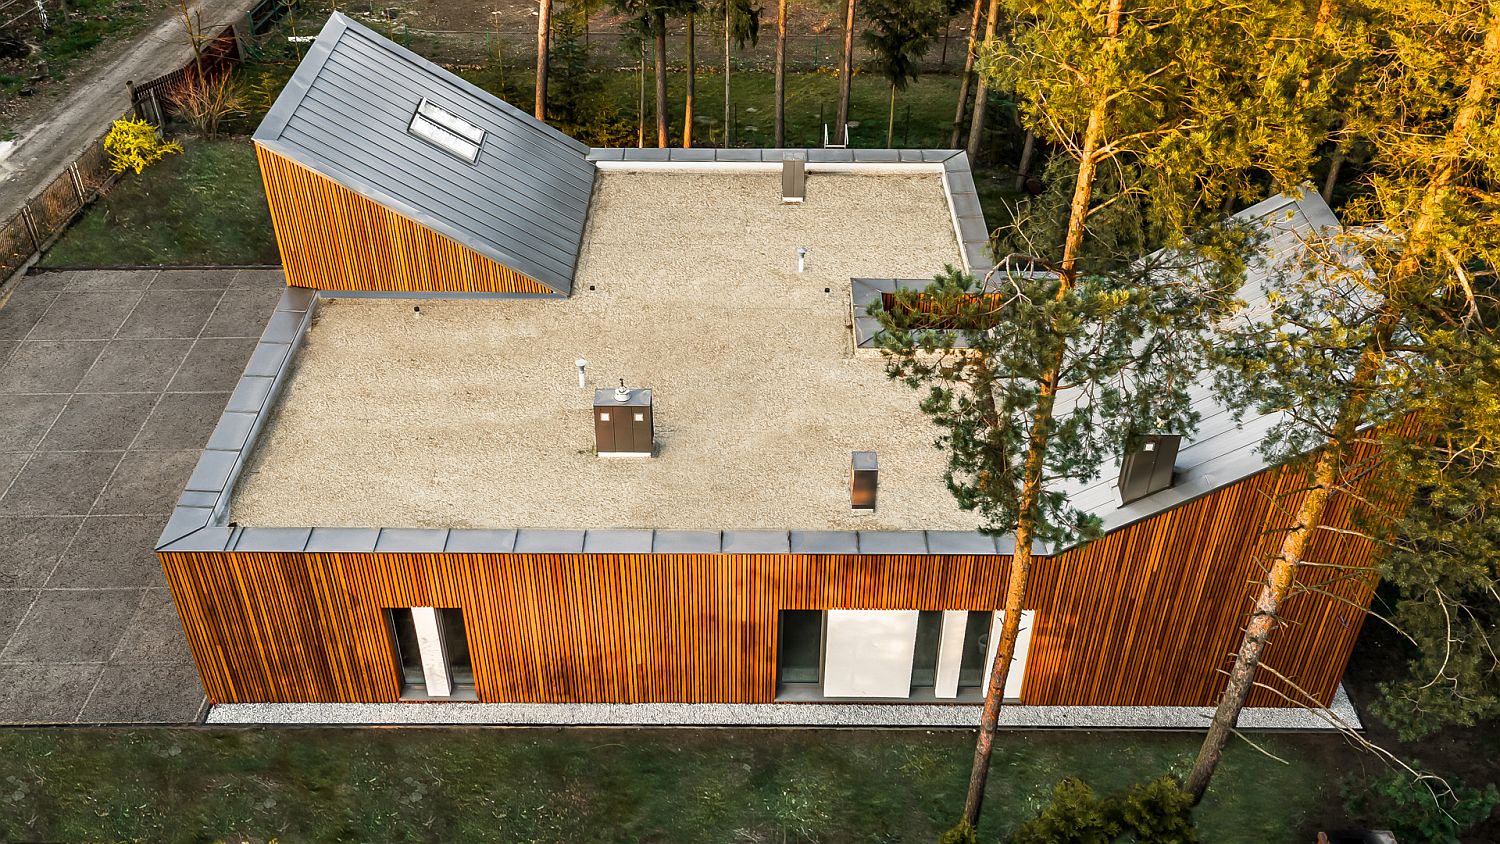 Pine forest offers natural shade to the forest house